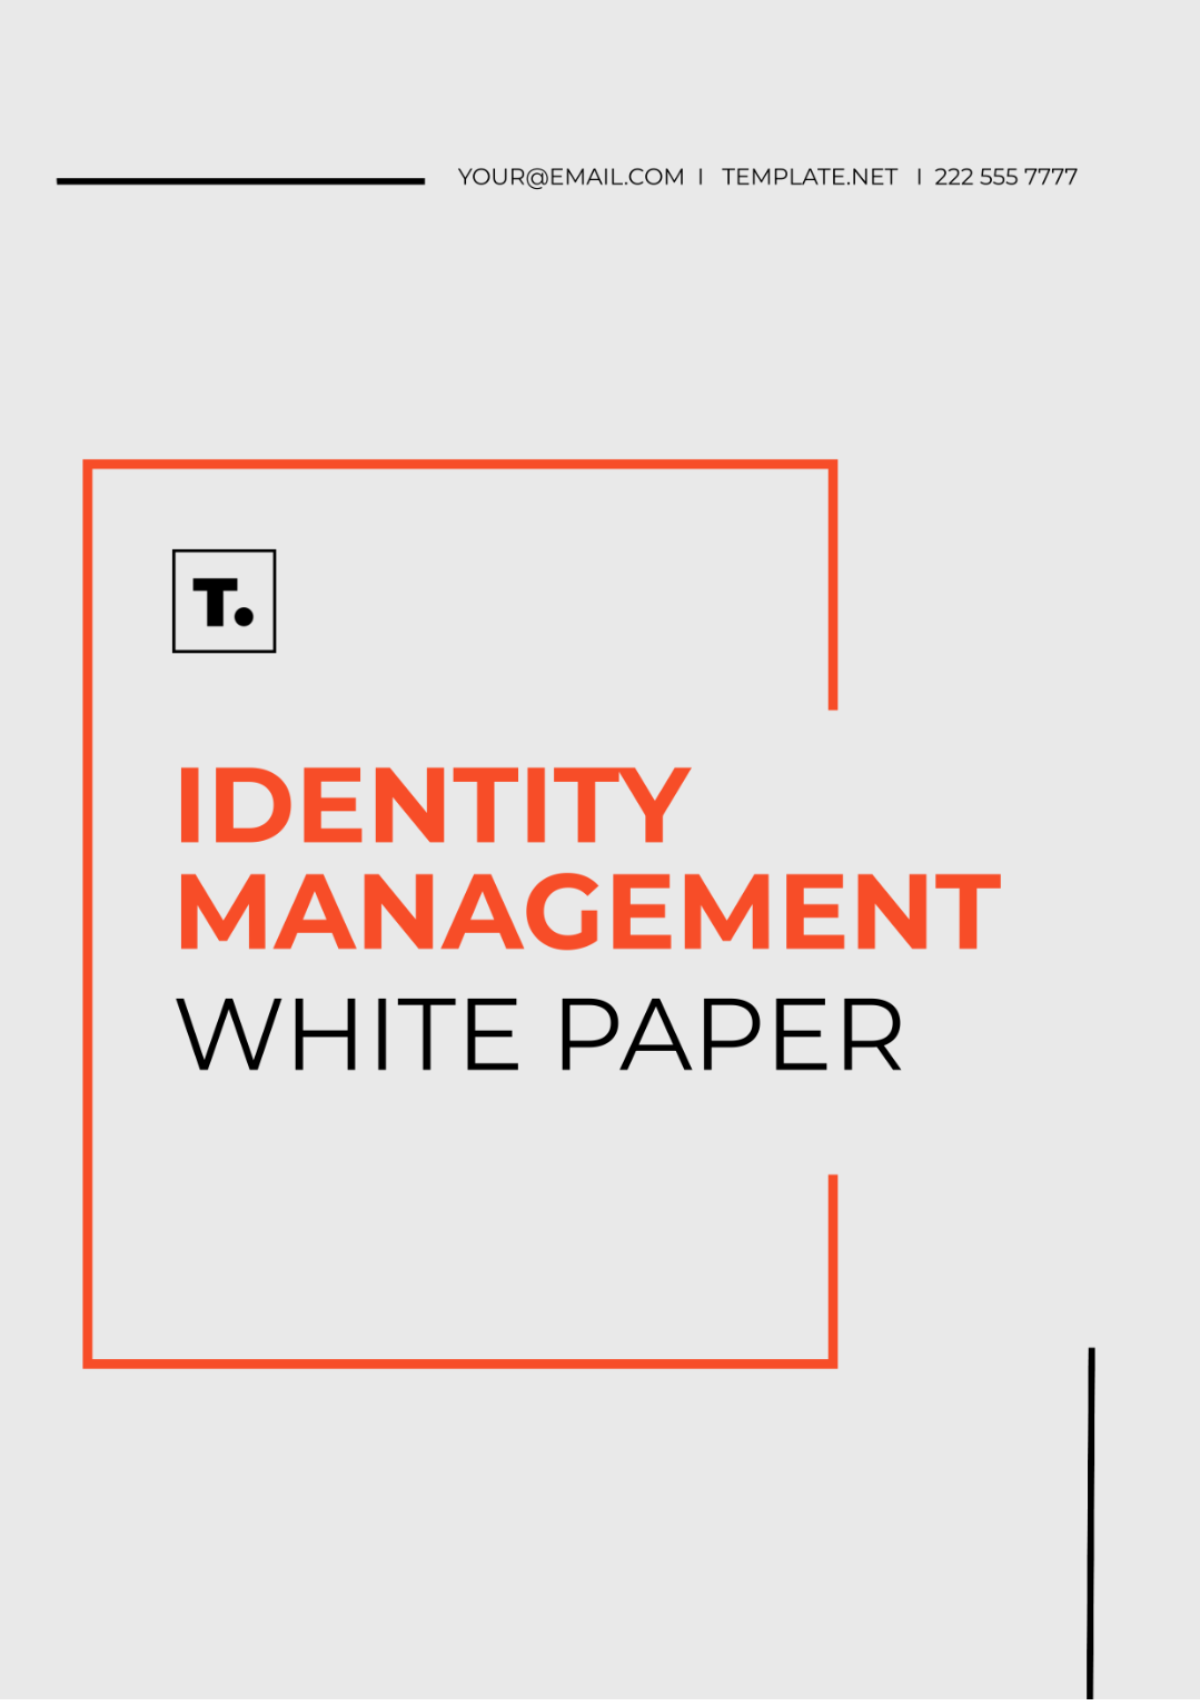 Identity Management White Paper Template